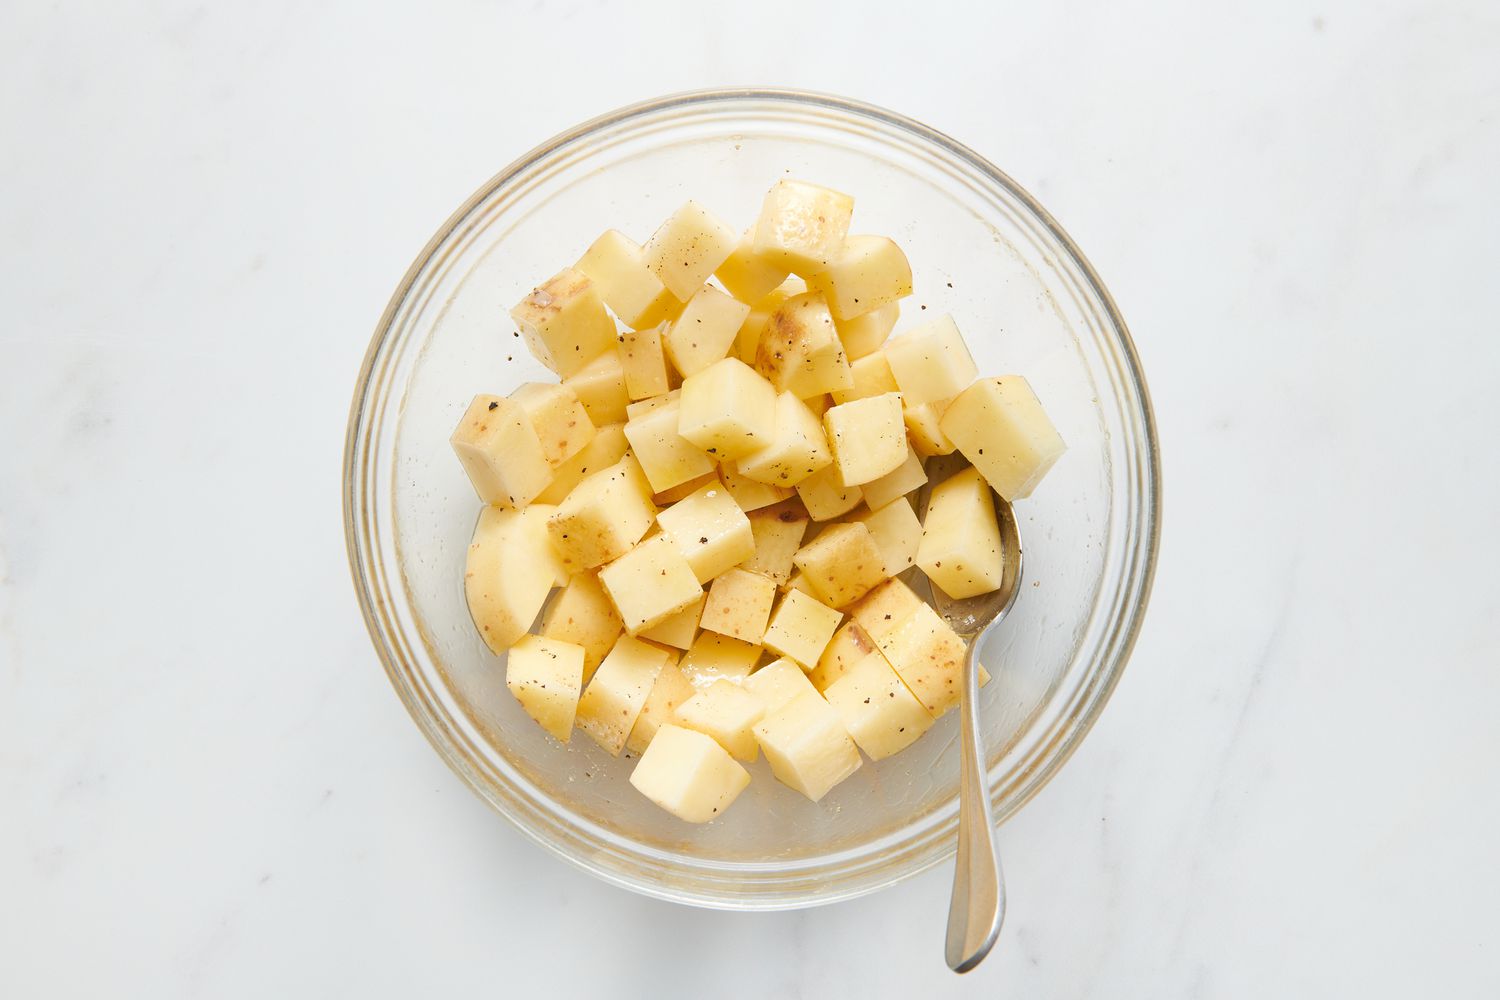 A large bowl of cubed, peeled russet potatoes tossed with olive oil, salt, and pepper